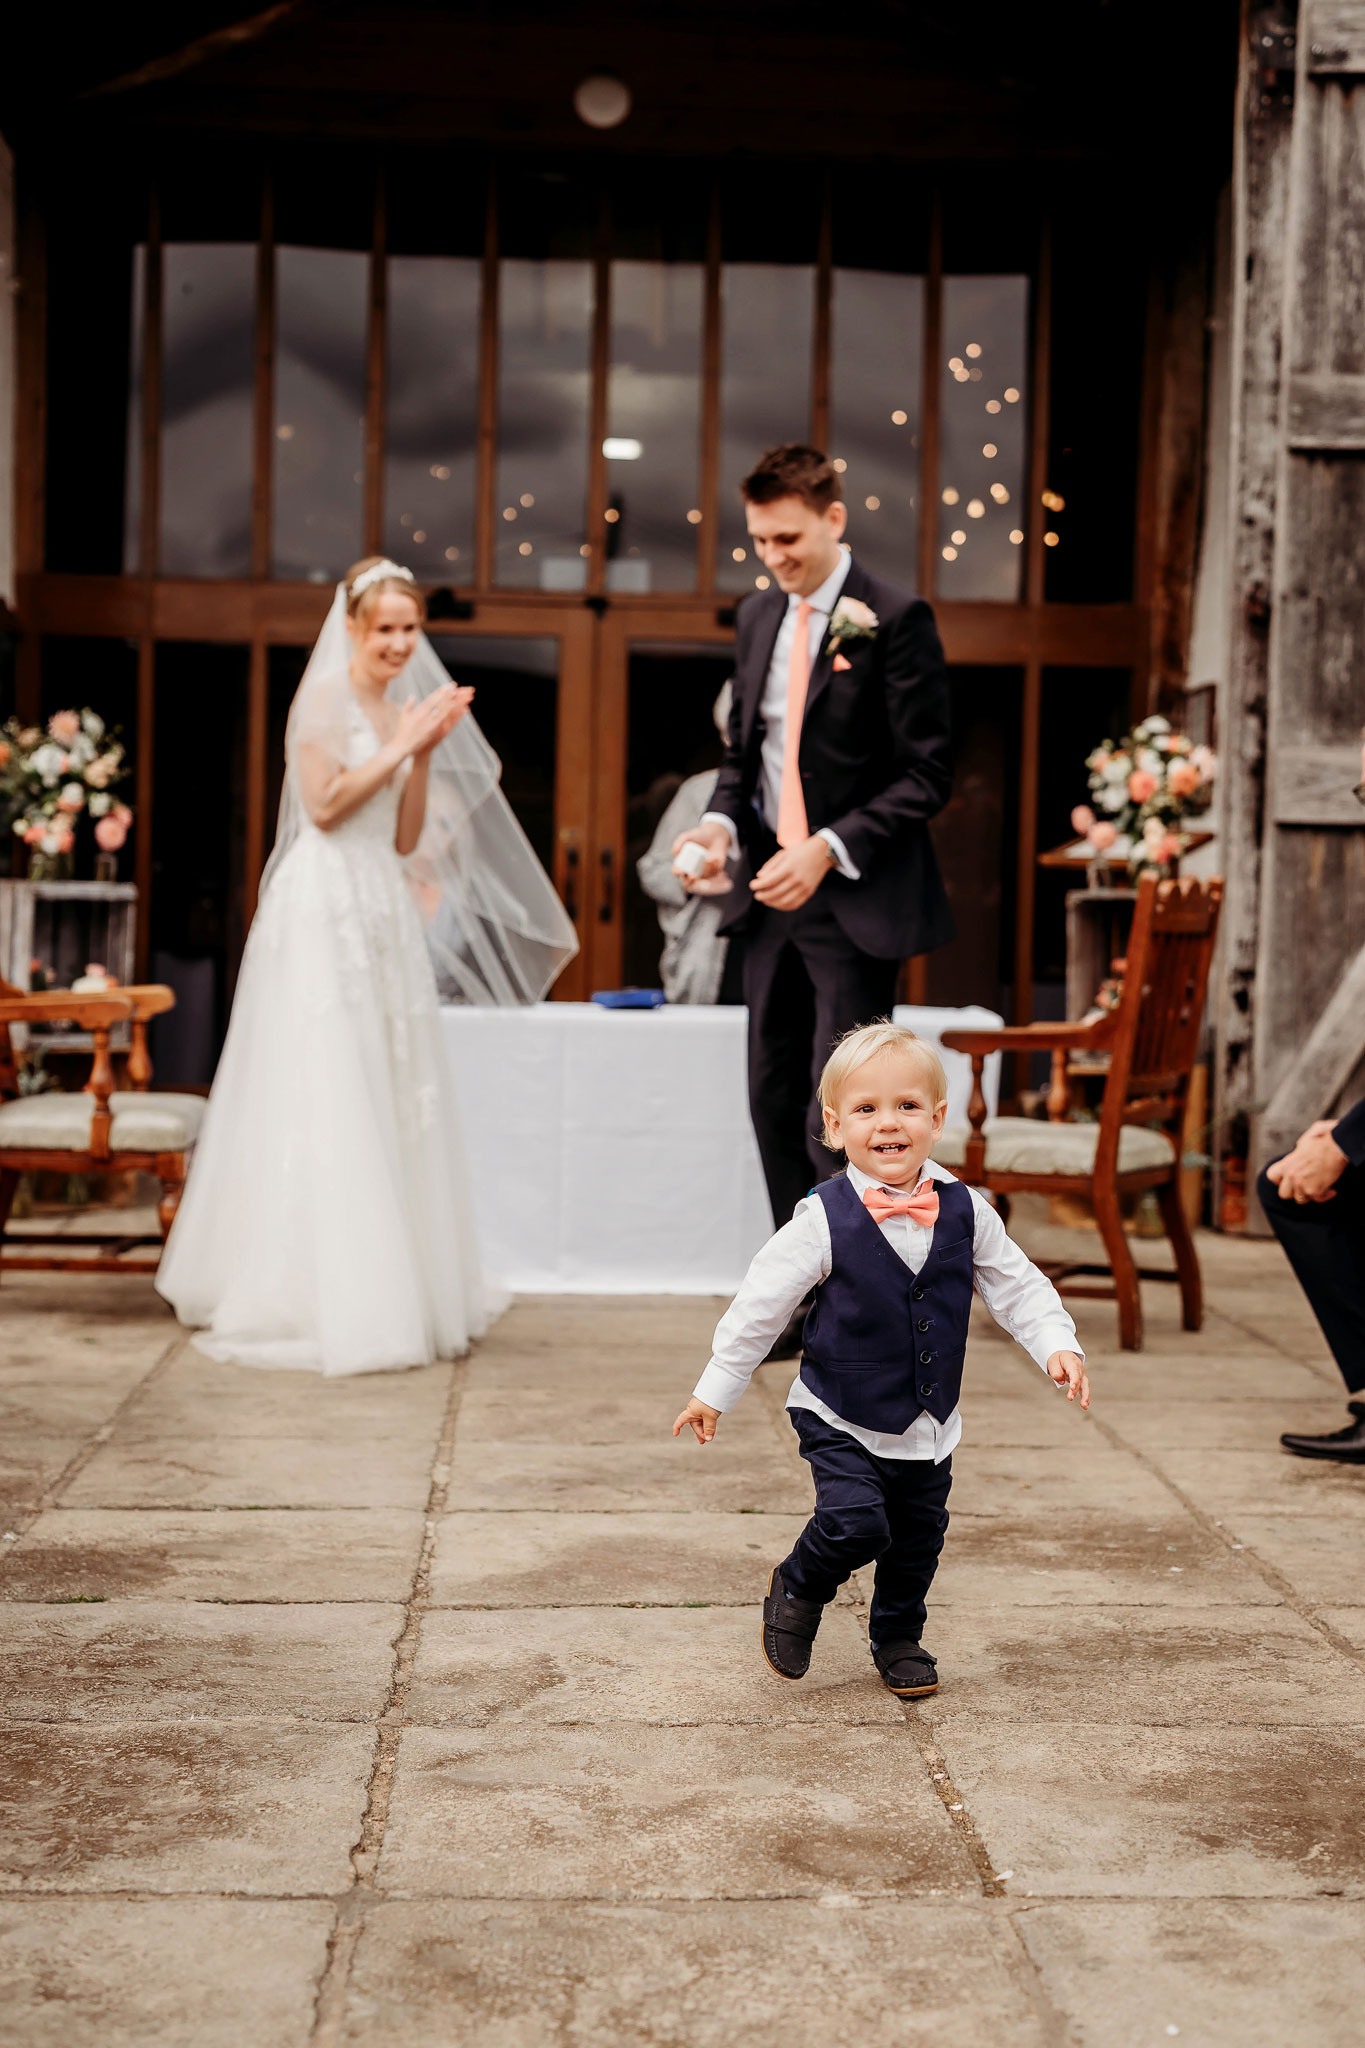 the sound ring bearer running towards the camera